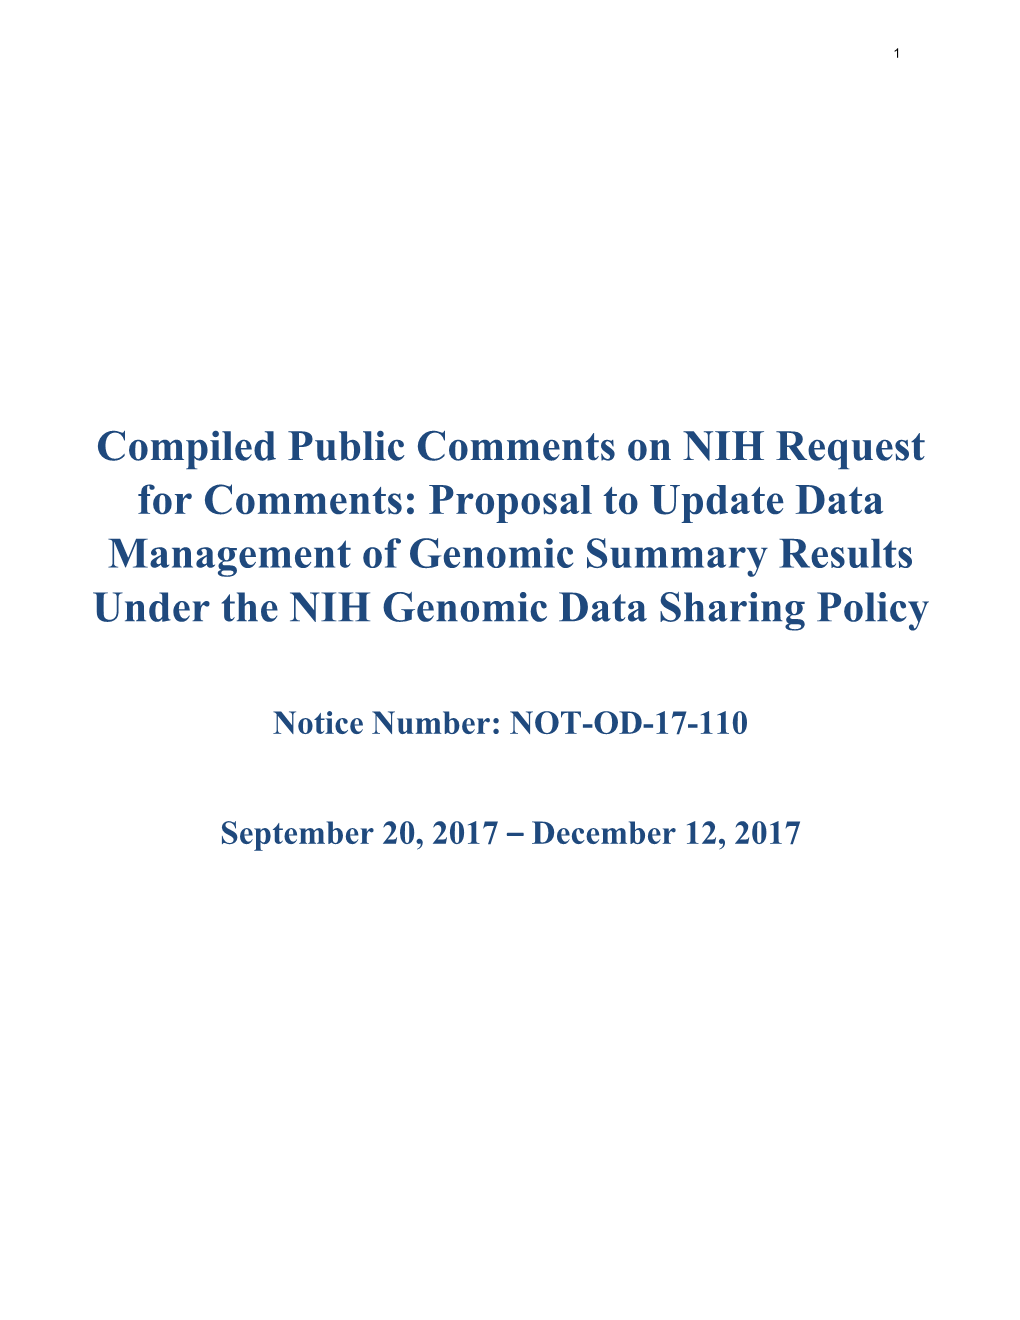 Compiled Public Comments on NIH Request for Comments: Proposal to Update Data Management of Genomic Summary Results Under the NIH Genomic Data Sharing Policy